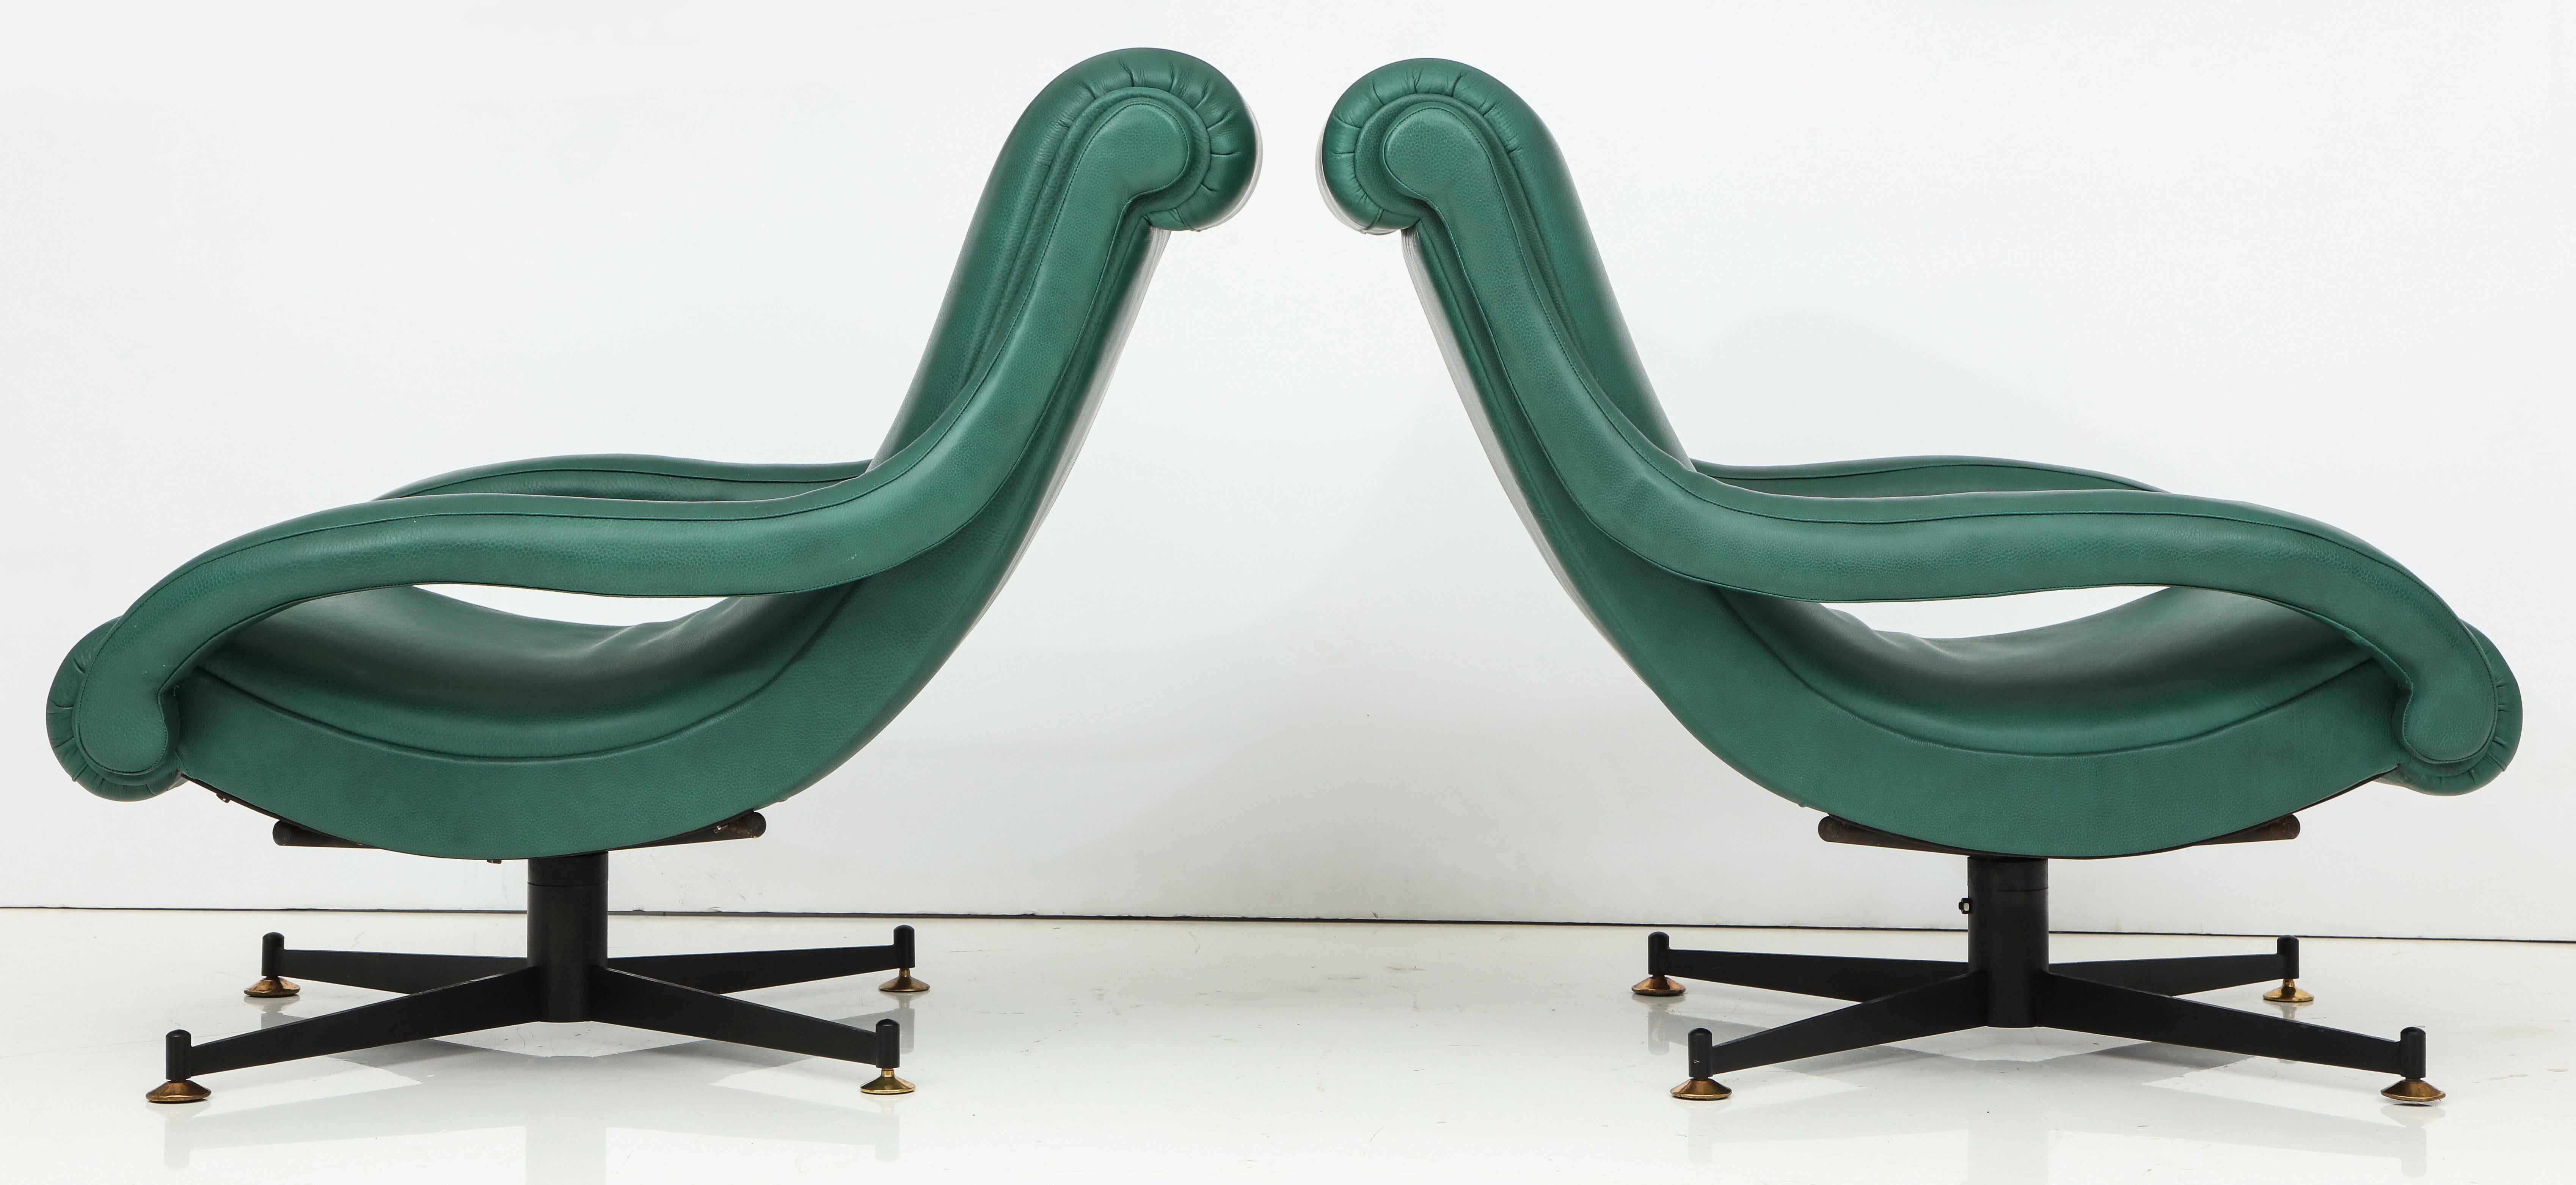 Pair of Lounge Chairs in Gucci Green Leather by Radice for Lenzi, c. 1950, Italy 5